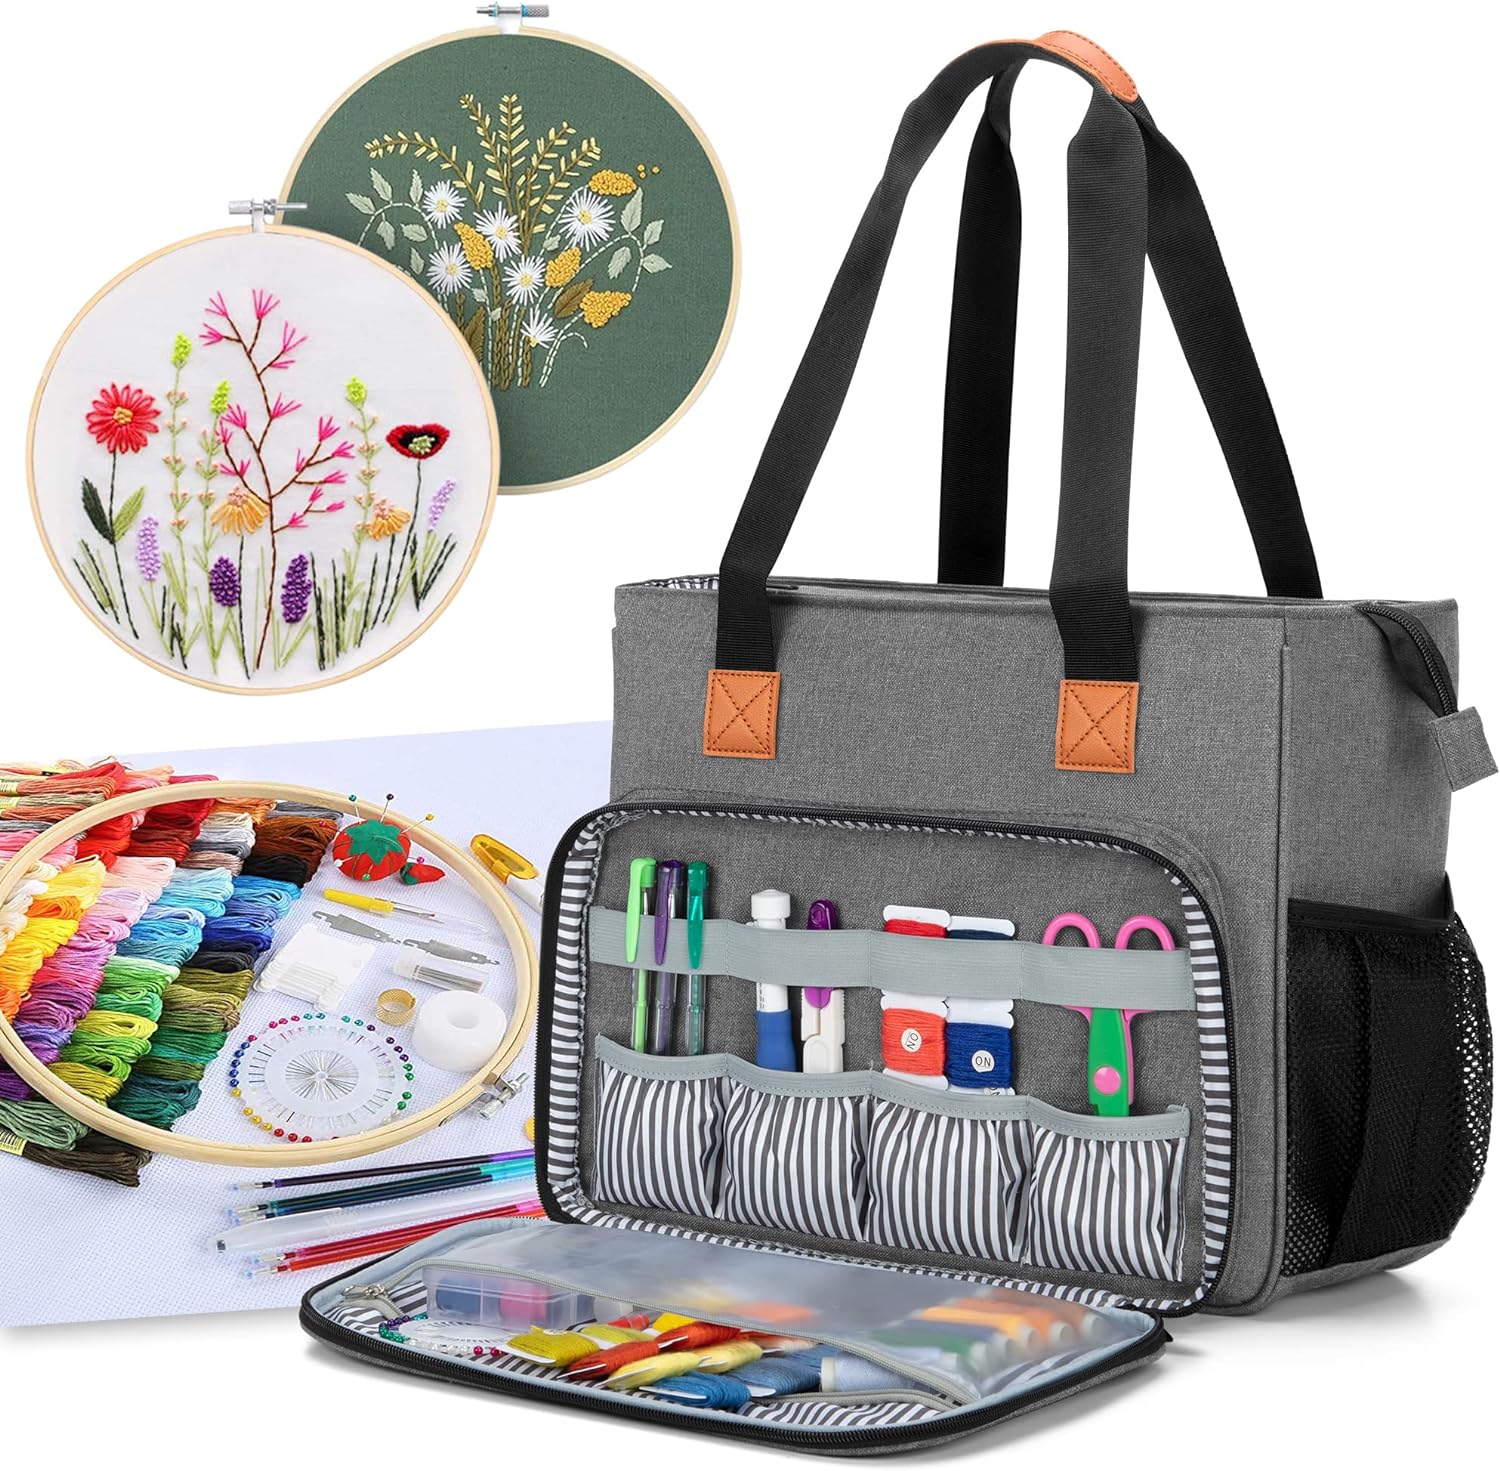 LUXJA Embroidery Project Carrying Bag, Embroidery Kits Storage Bag (Bag Only), Gray